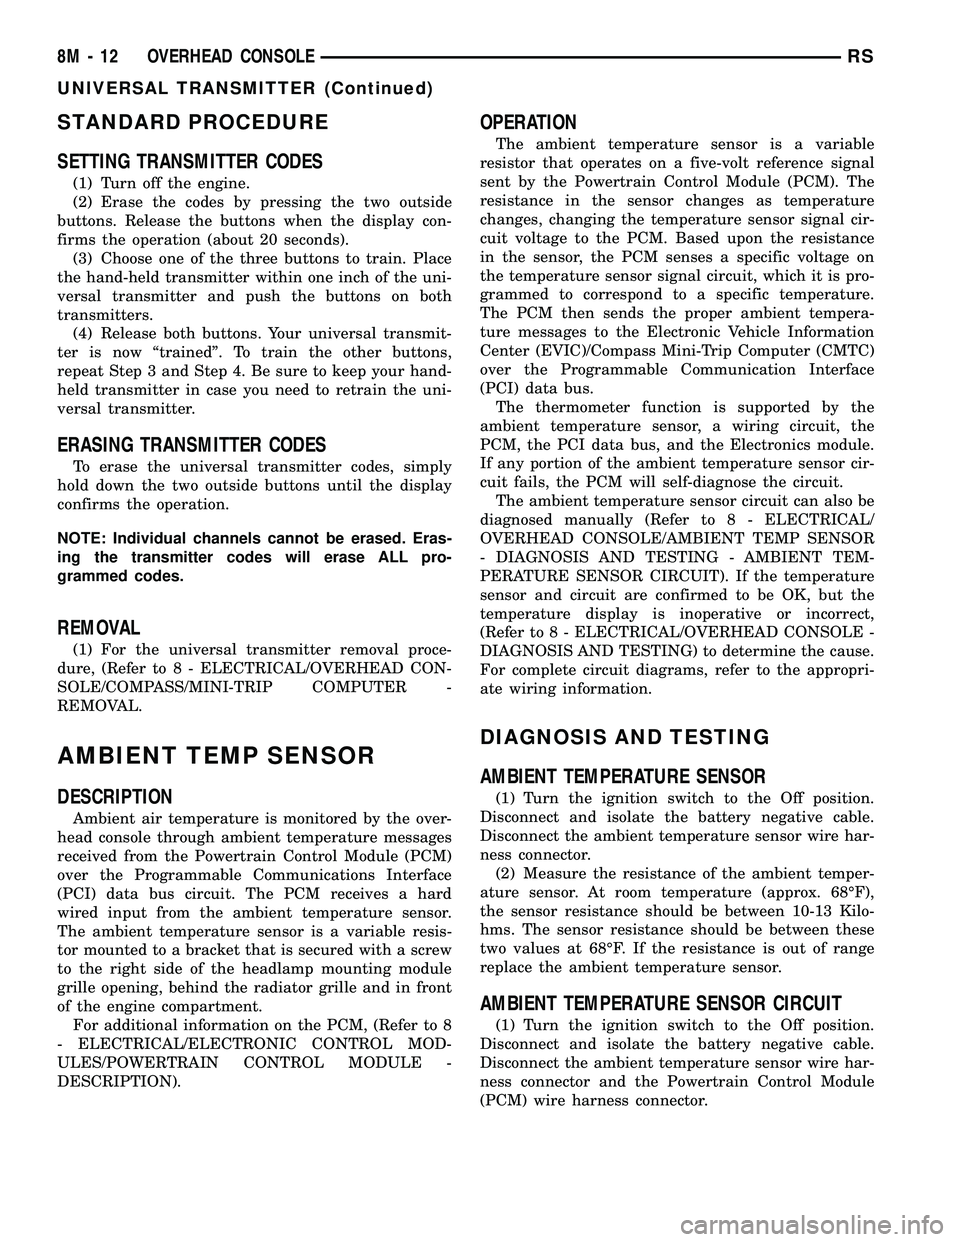 CHRYSLER VOYAGER 2005  Service Manual STANDARD PROCEDURE
SETTING TRANSMITTER CODES
(1) Turn off the engine.
(2) Erase the codes by pressing the two outside
buttons. Release the buttons when the display con-
firms the operation (about 20 s